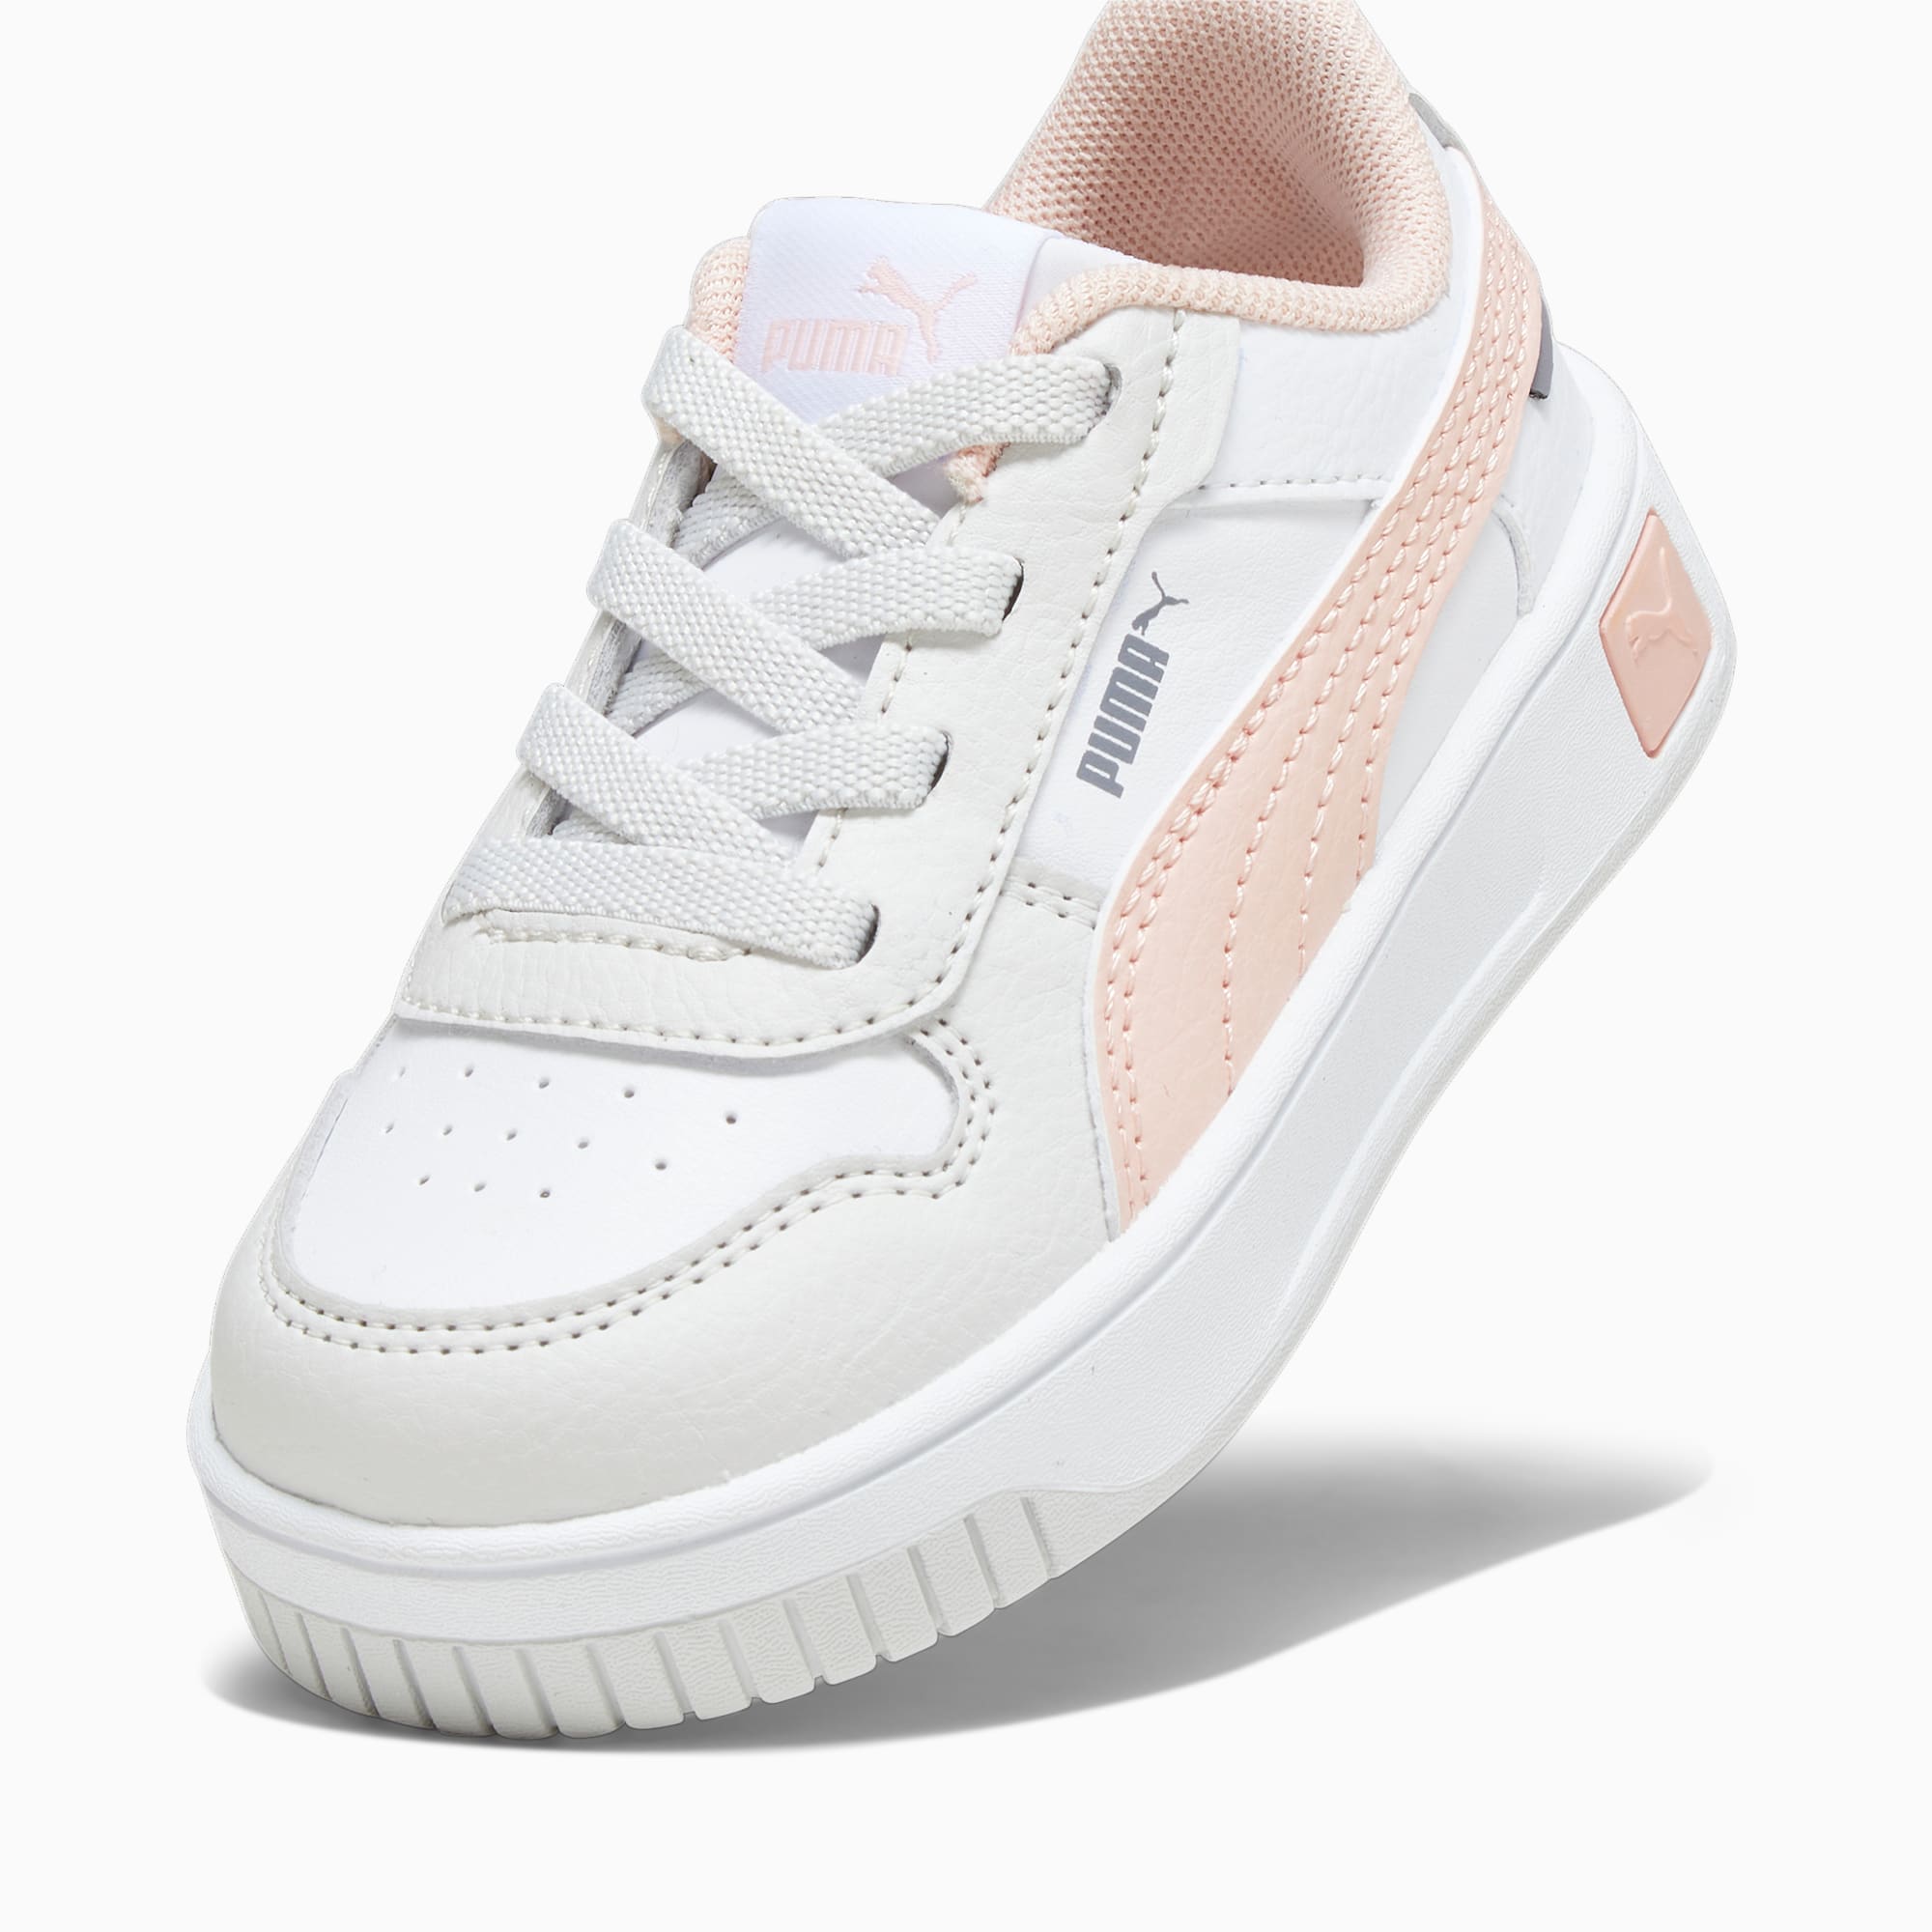 PUMA Carina Street Toddlers' Sneakers, White/Rose Dust/Feather Grey, Size 19, Shoes